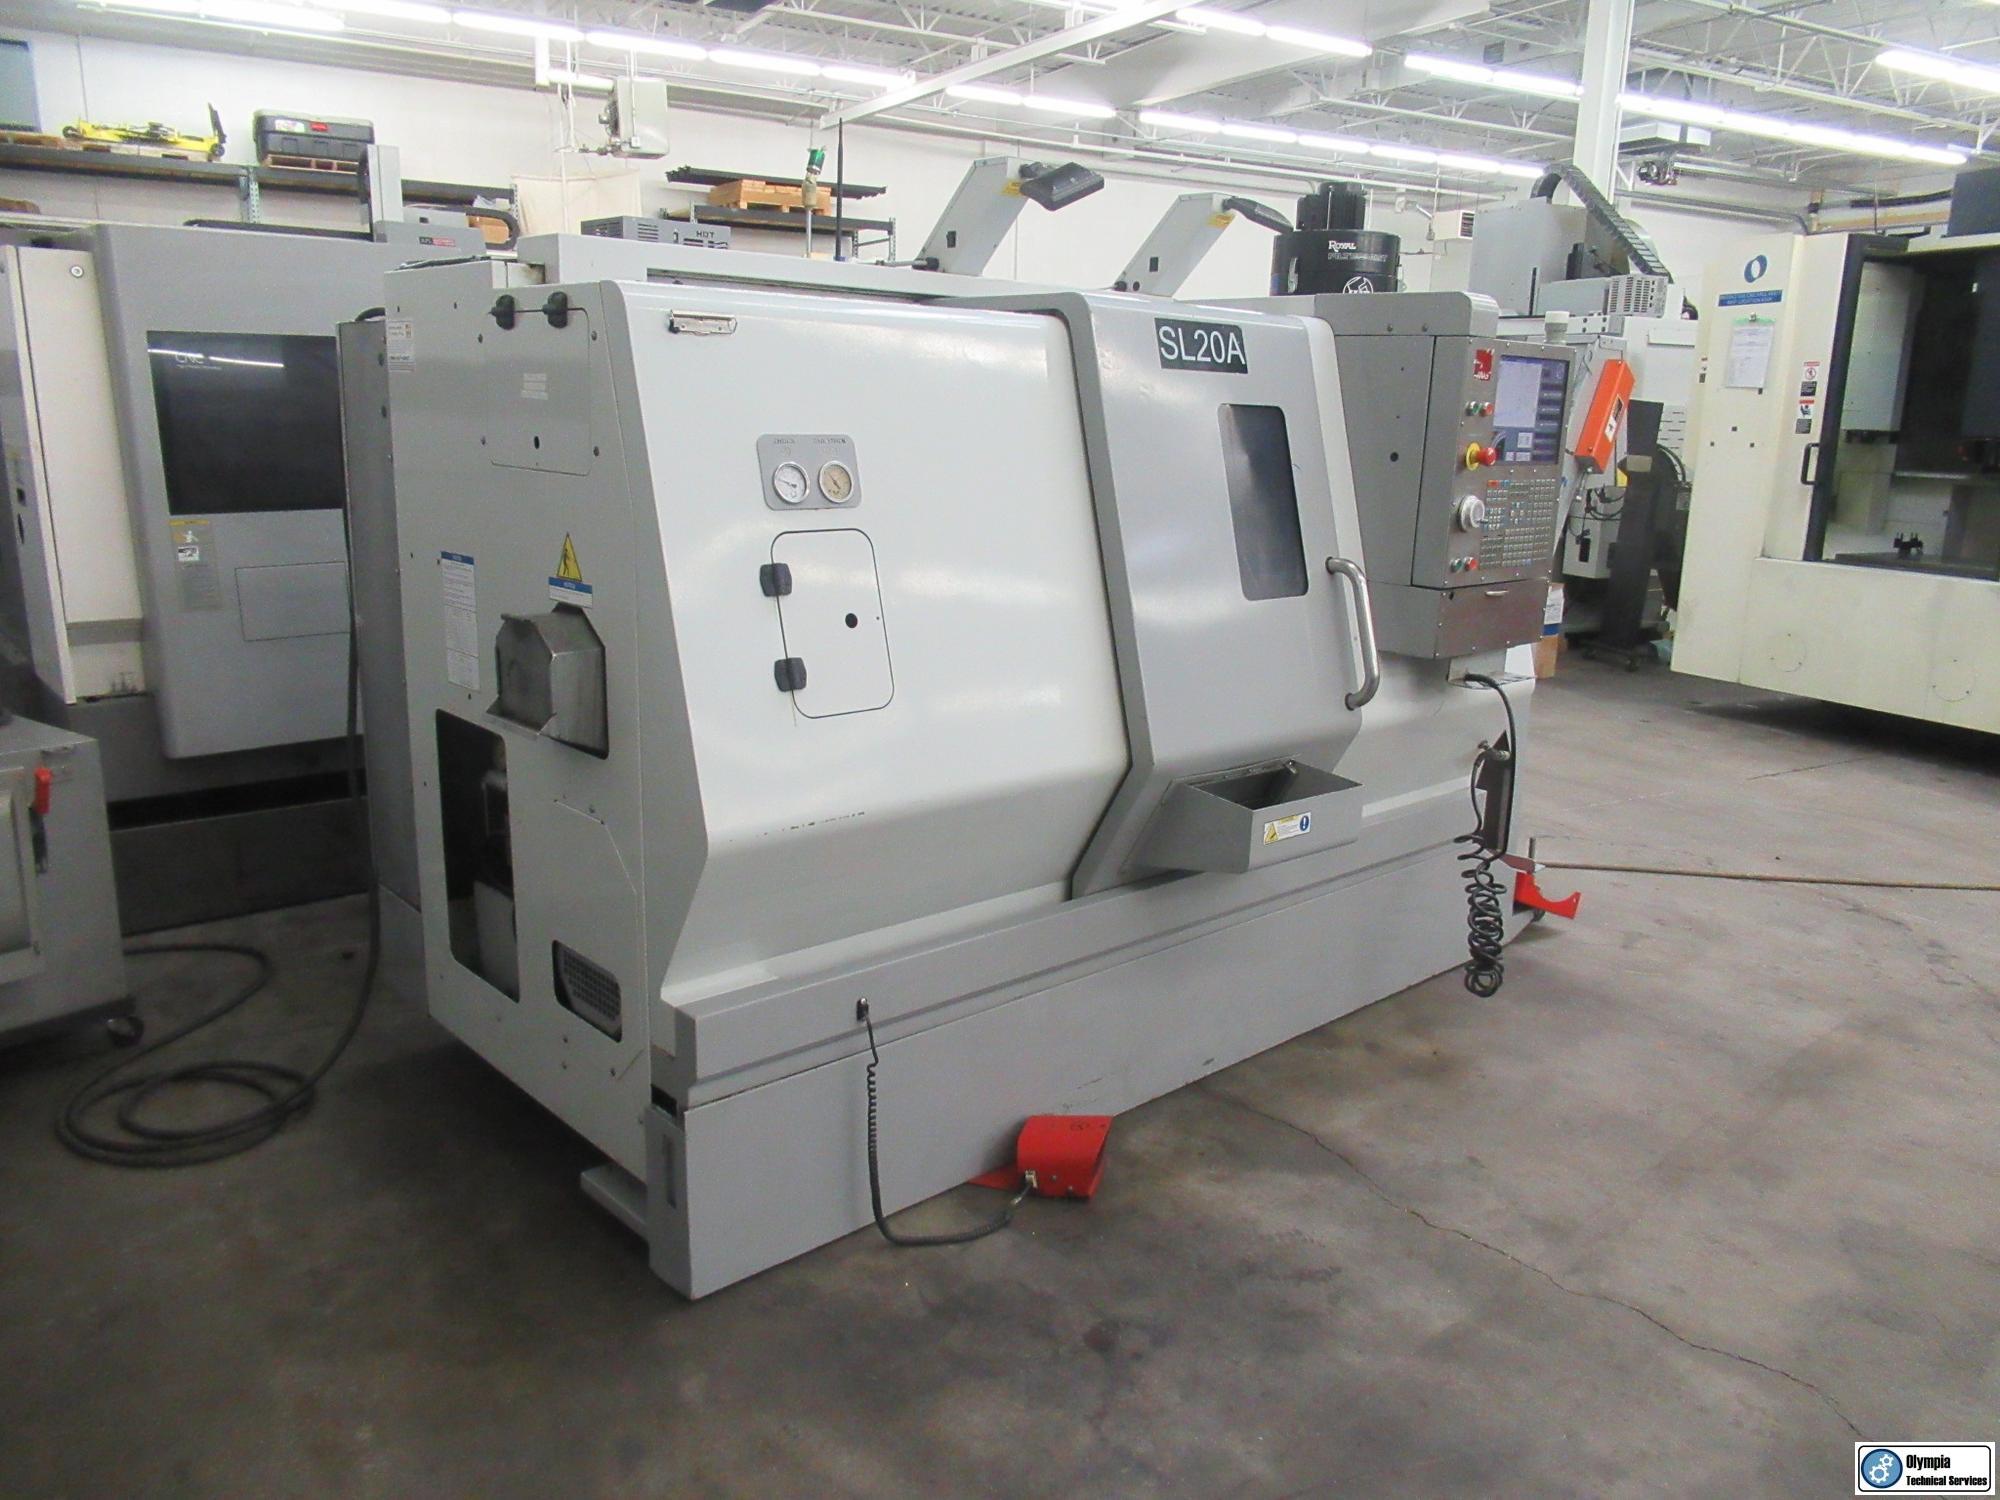 2008 HAAS SL-20 CNC Lathes | Olympia Technical Services